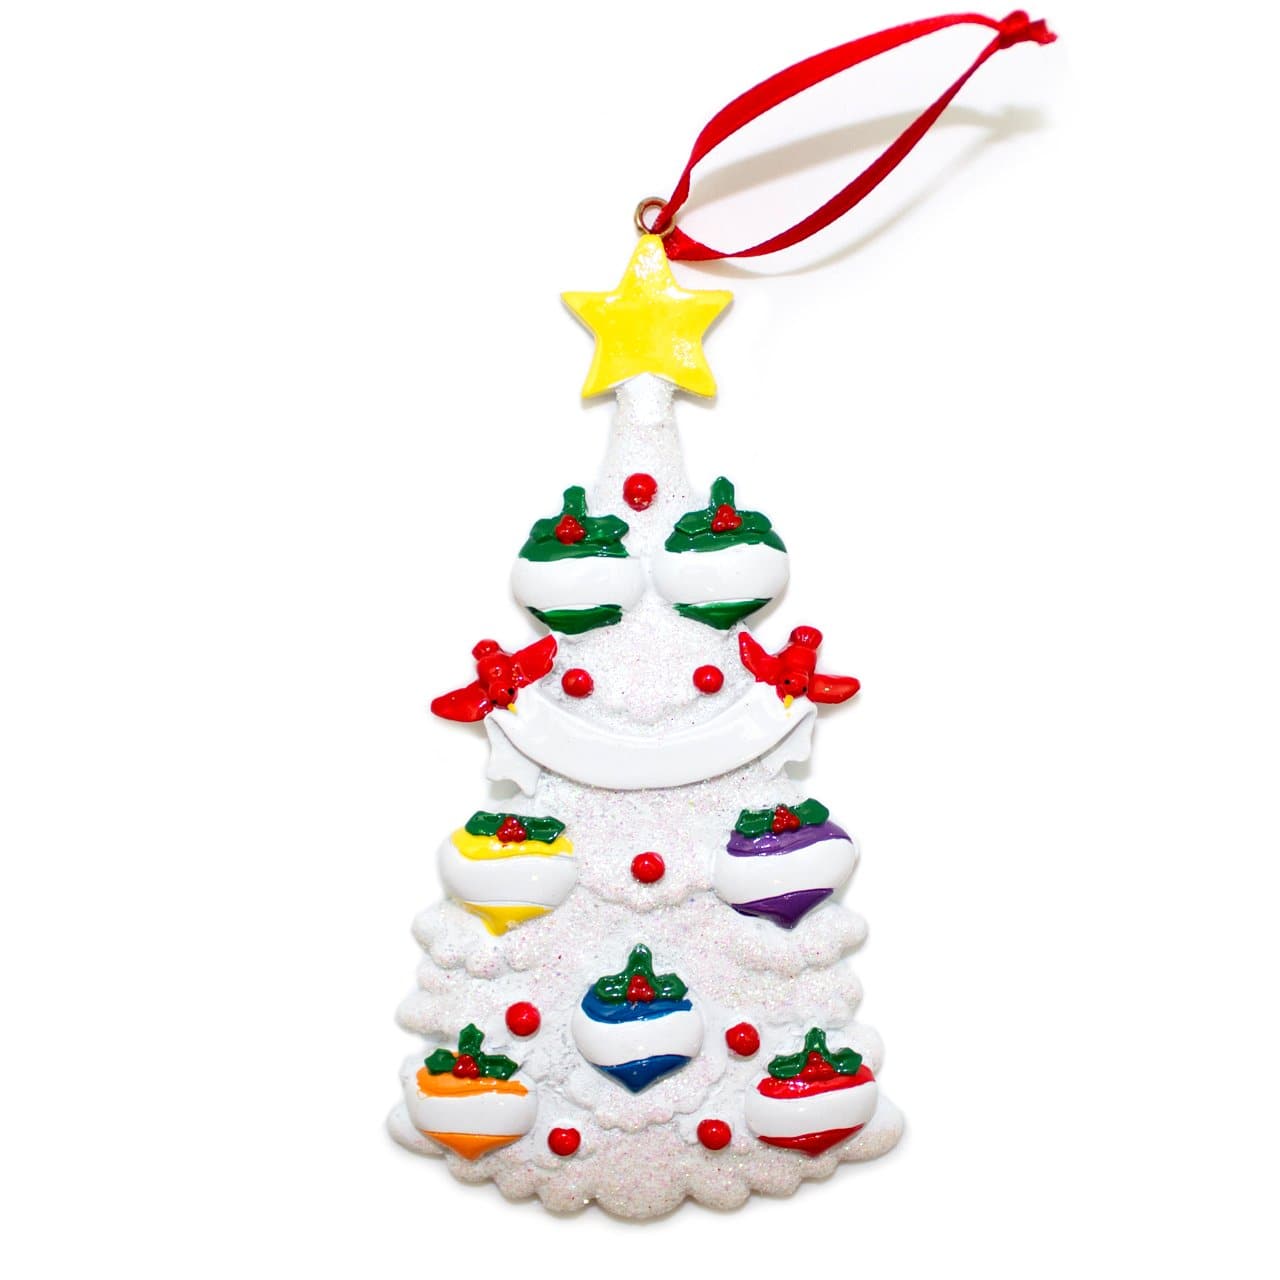 Glitter Christmas Tree - Christmas Ornament (Suitable for Personalization)